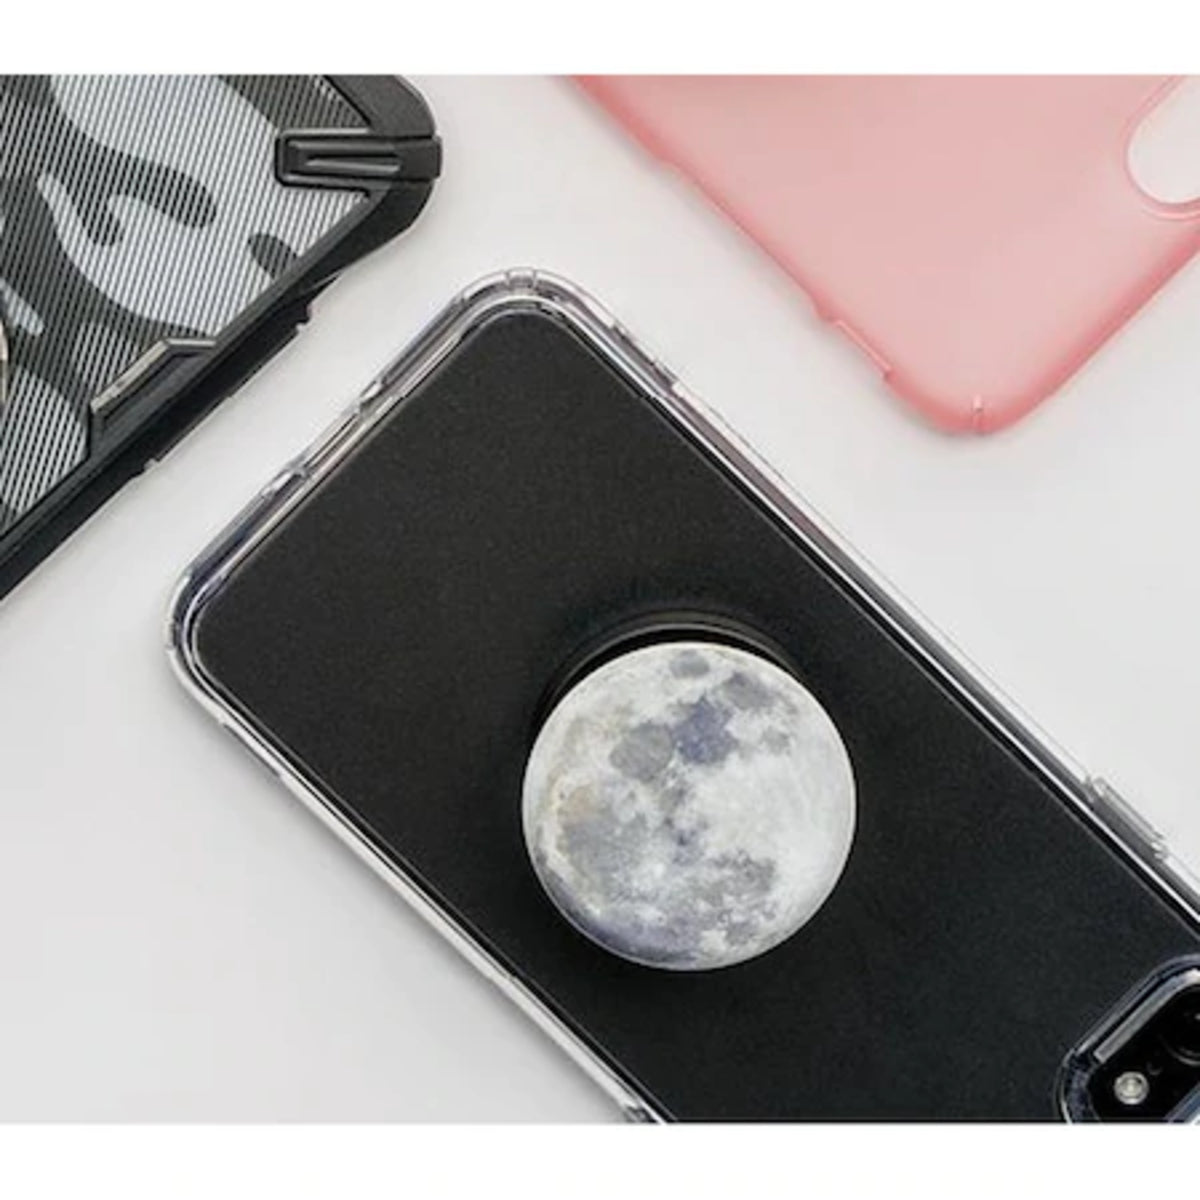 Shop and buy Ringke Griptok PopSocket for Smart Devices Curved edges Frameless Billowing Voluminous Effect| Casefactorie® online with great deals and sales prices with fast and safe shipping. Casefactorie is the largest Singapore official authorised retailer for the largest collection of mobile premium accessories.